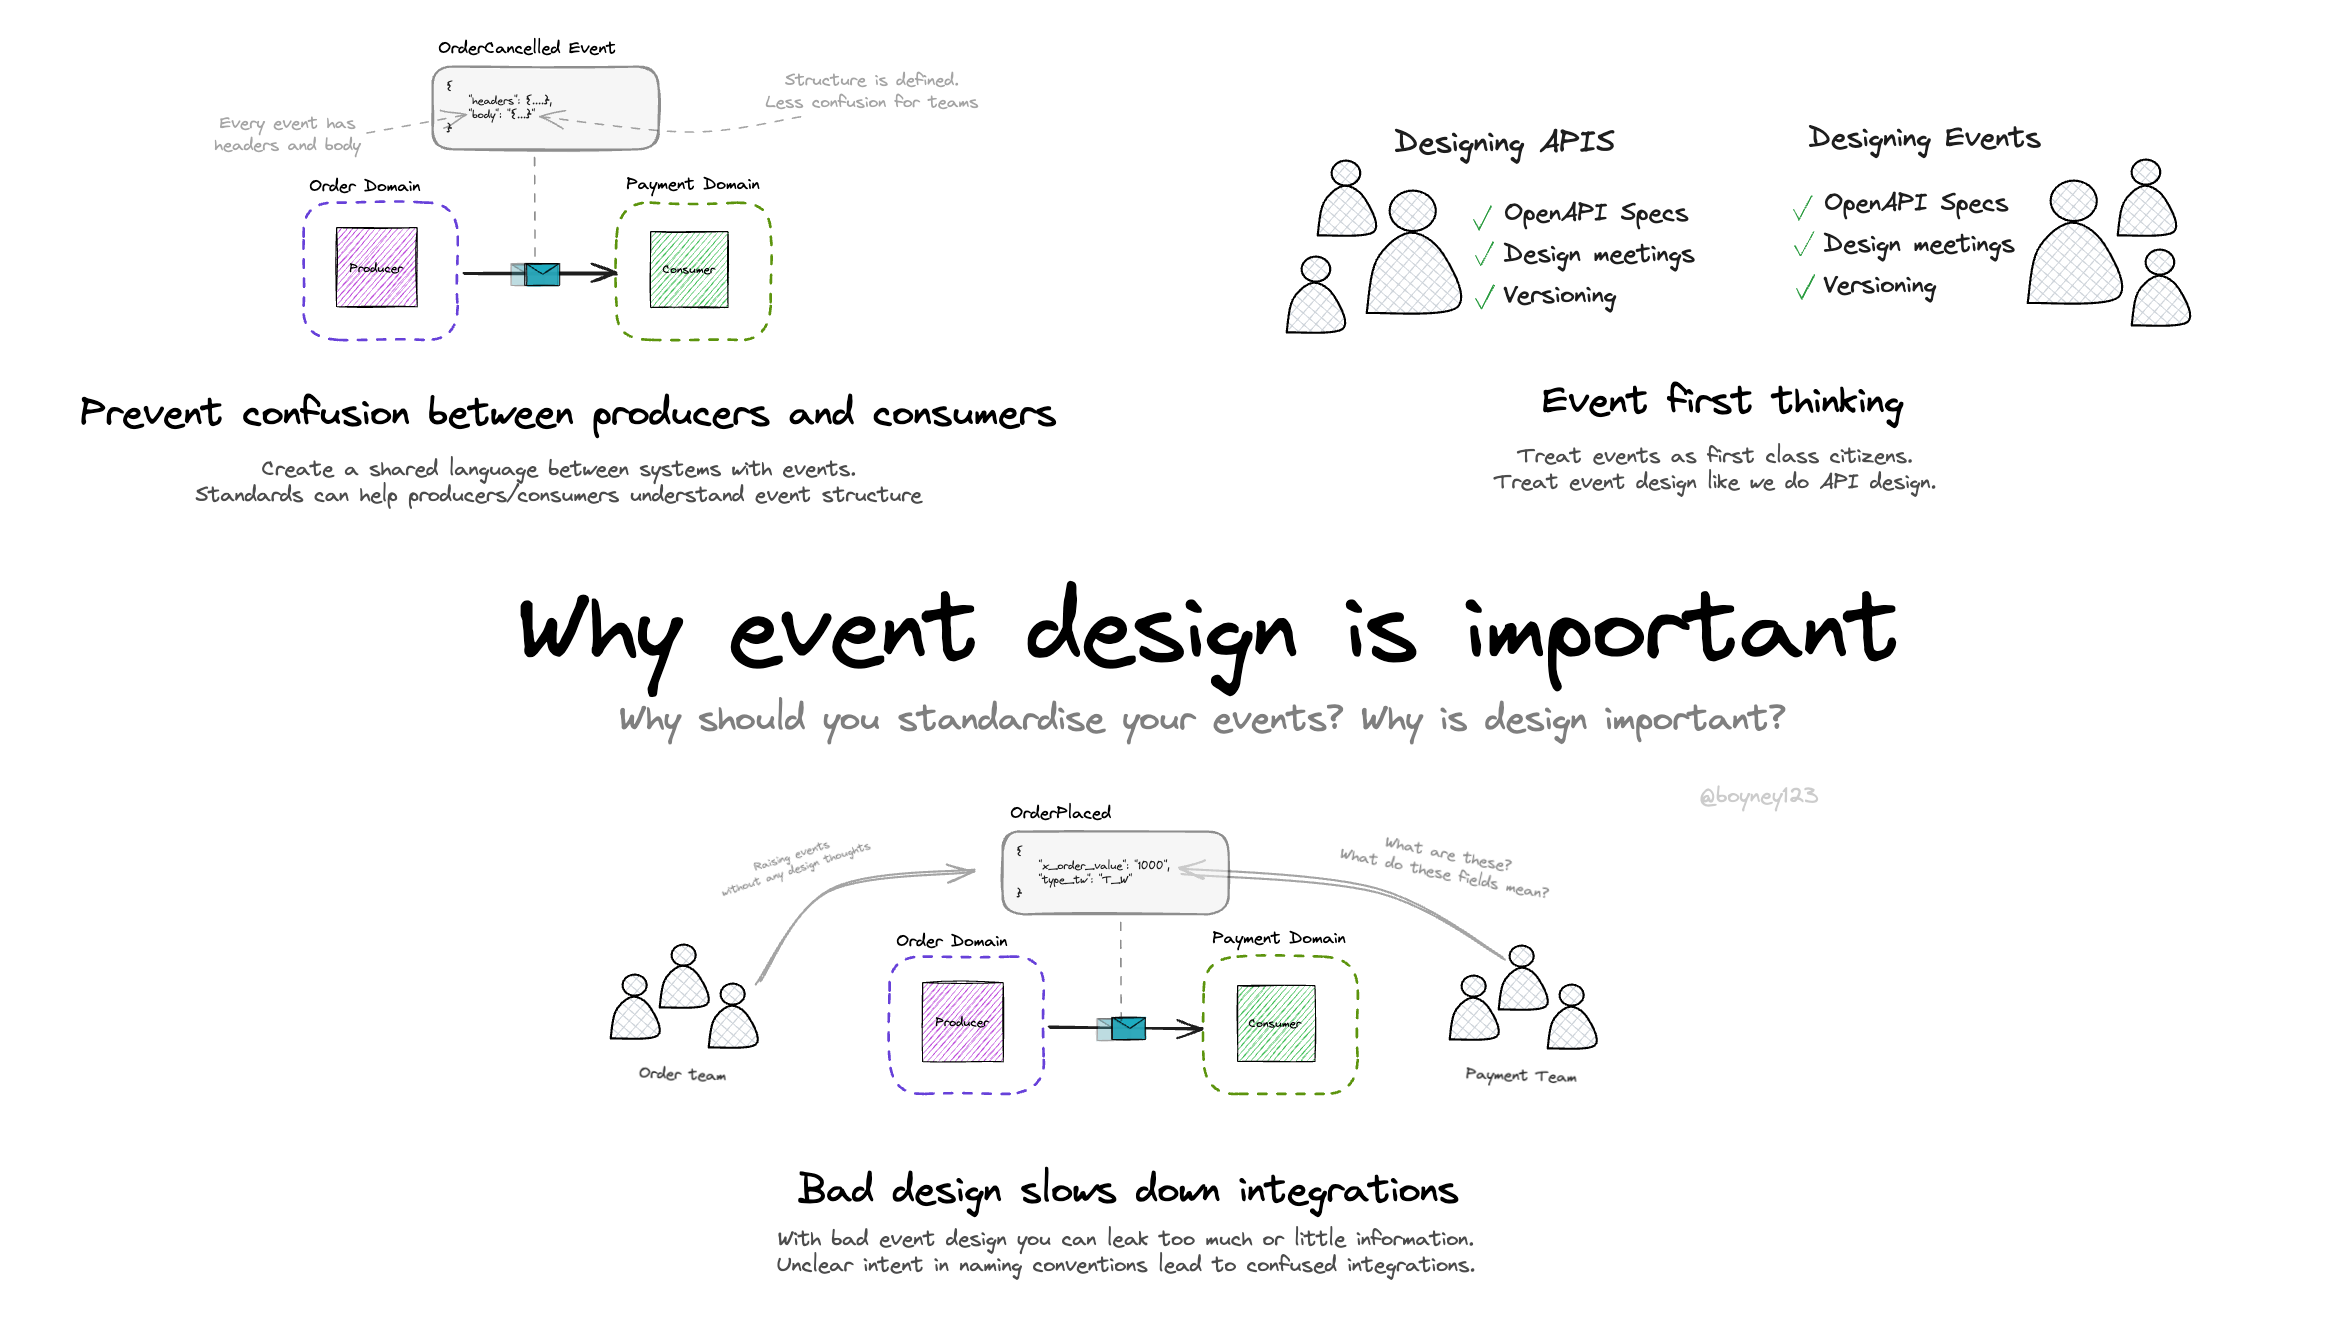 Why event design is important